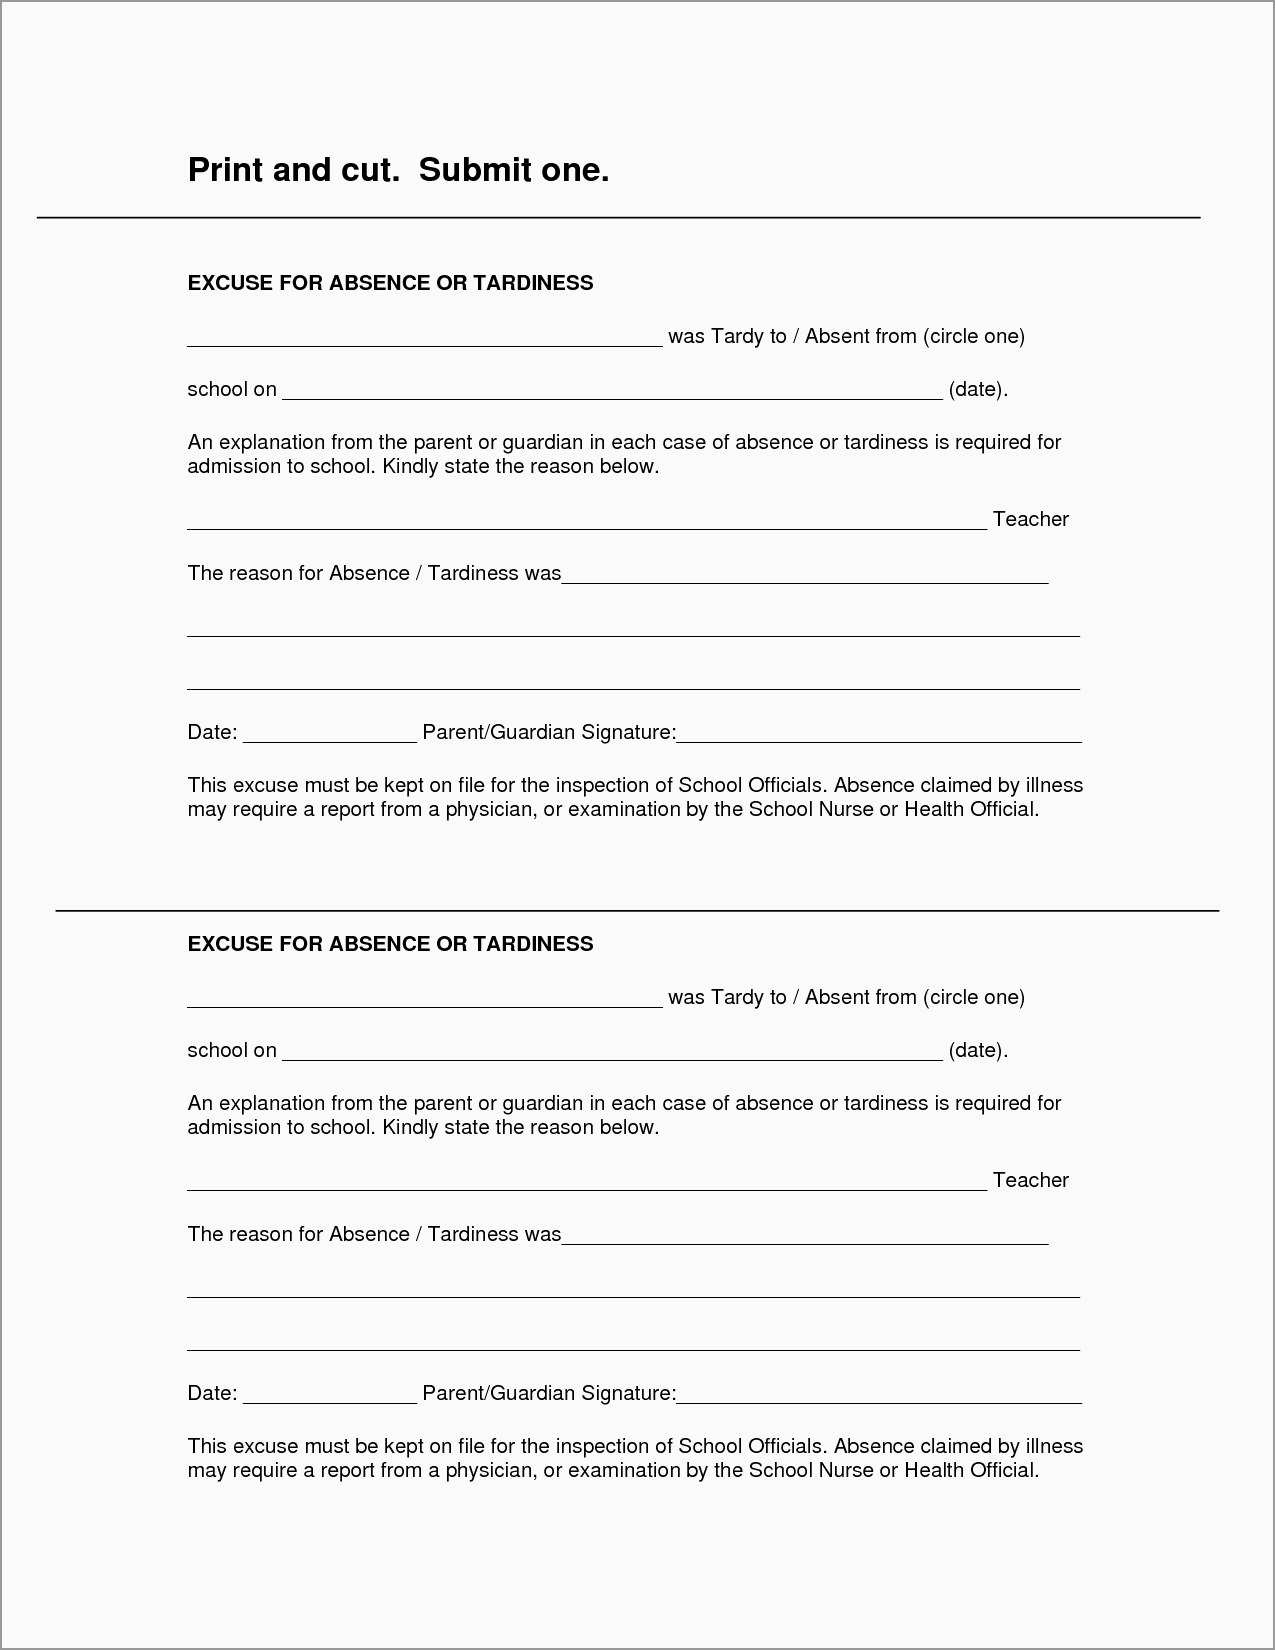 Free Printable Doctors Notes Templates Best Free Printable Doctors - Free Printable Doctors Excuse